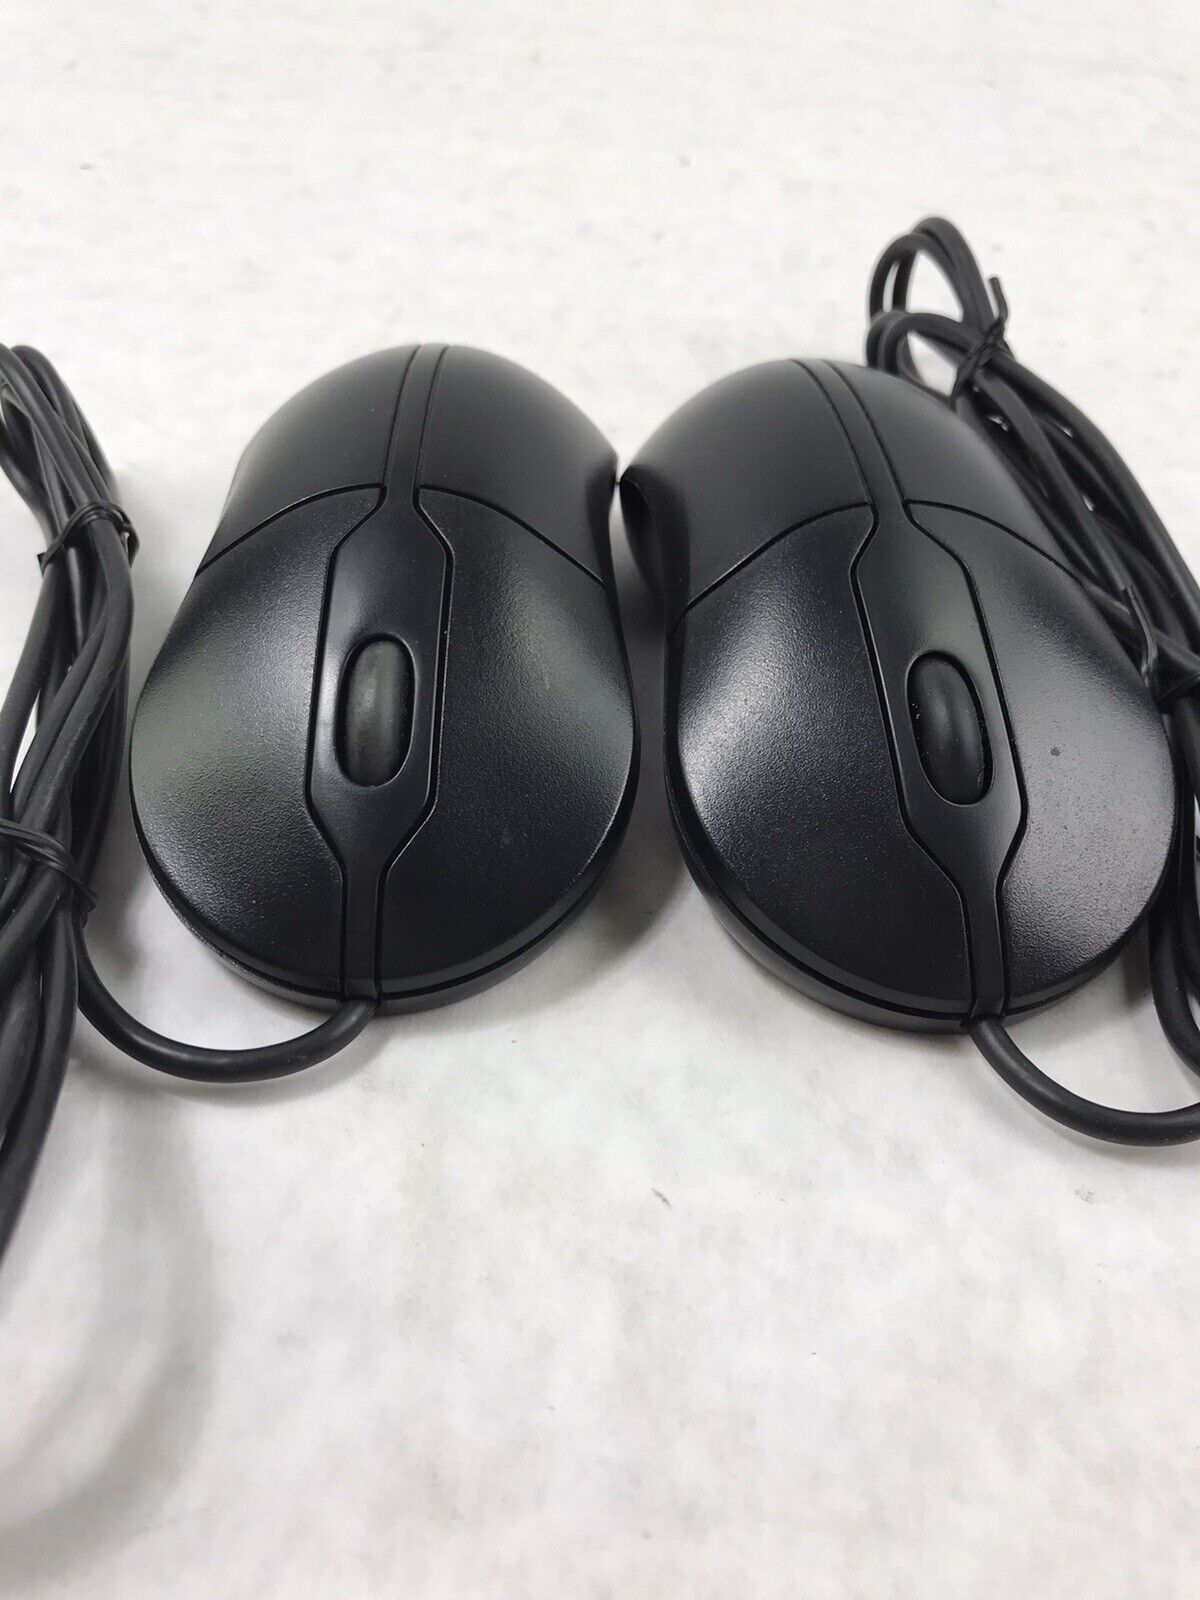 Lot of 2 Dell Wired Optical Mouse M-UAR MOC5OU